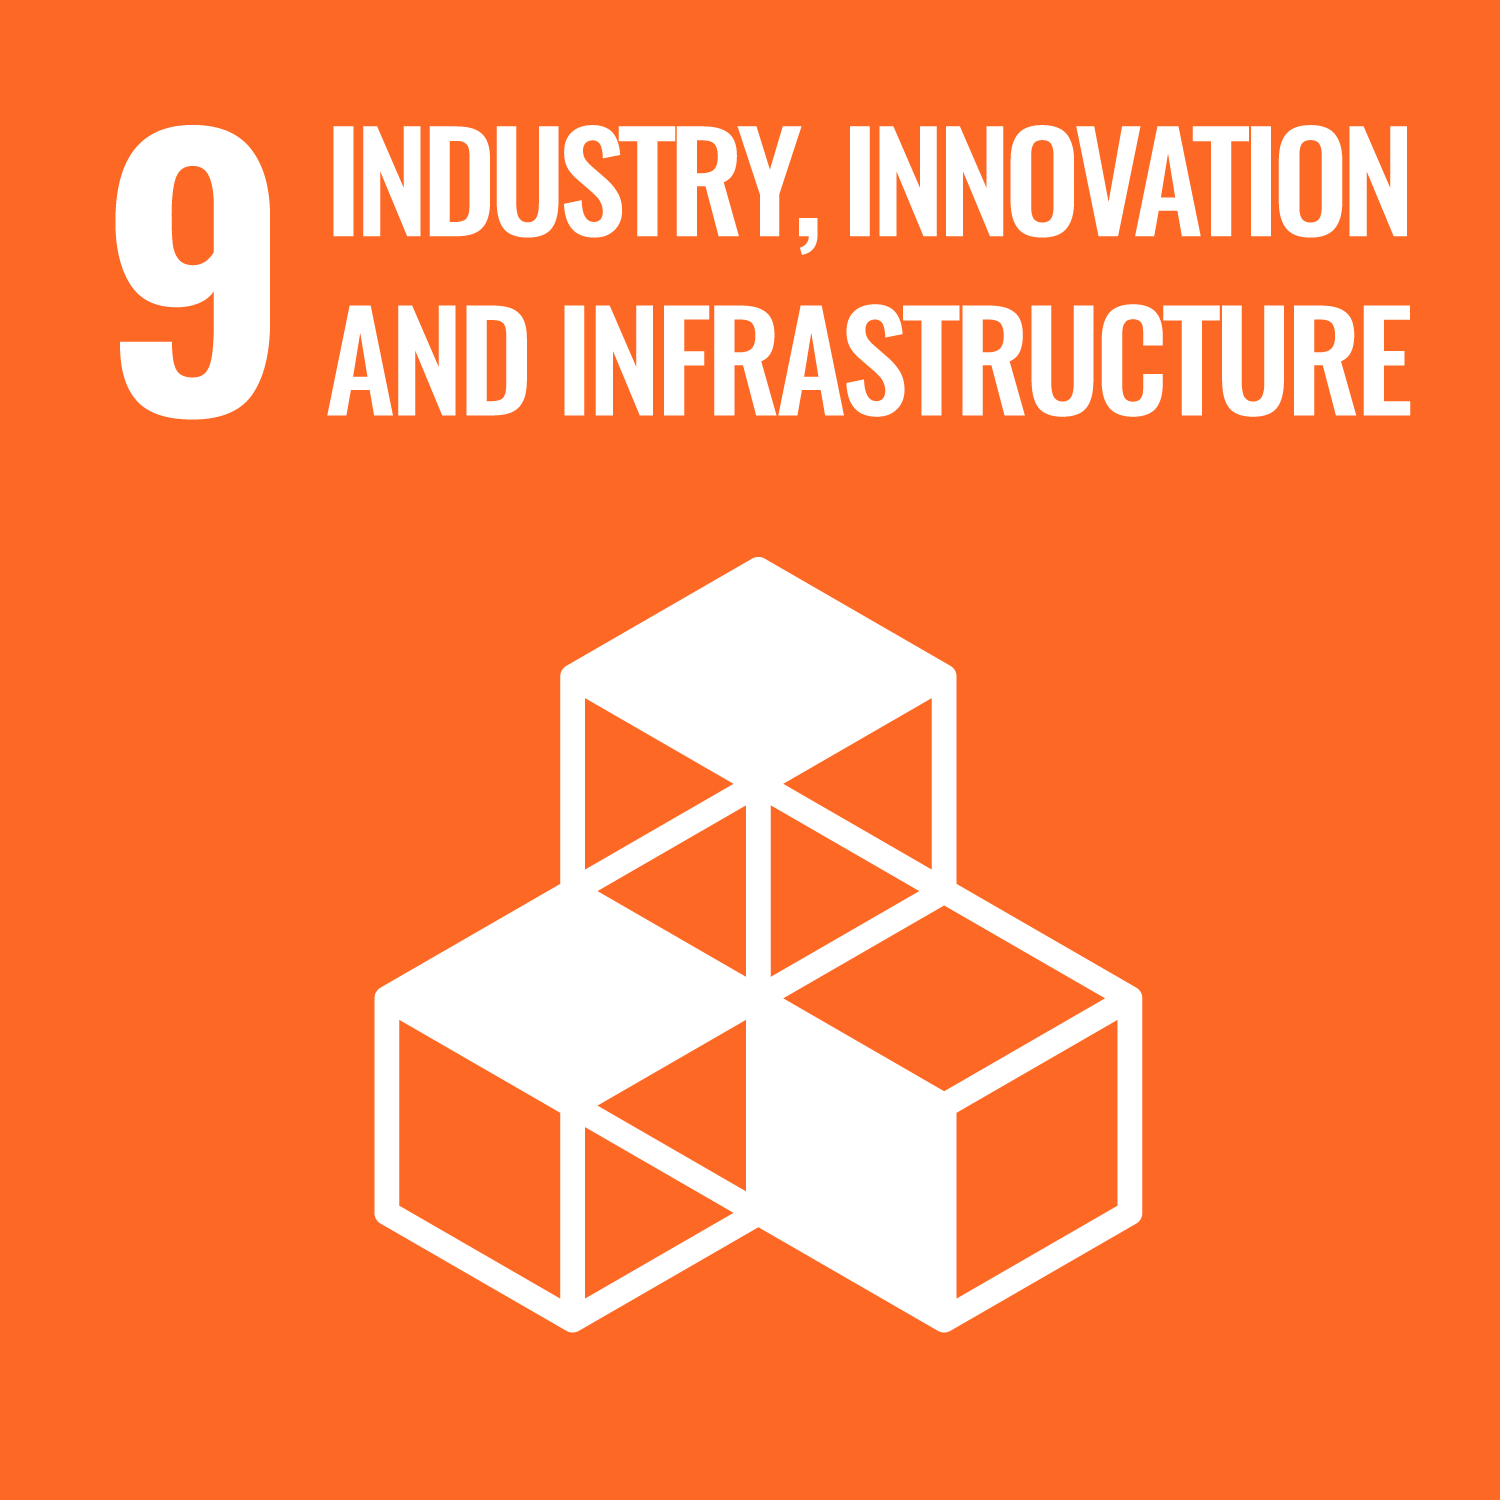 Sustainable Development Goal 9: Industry, innovation and infrastructure